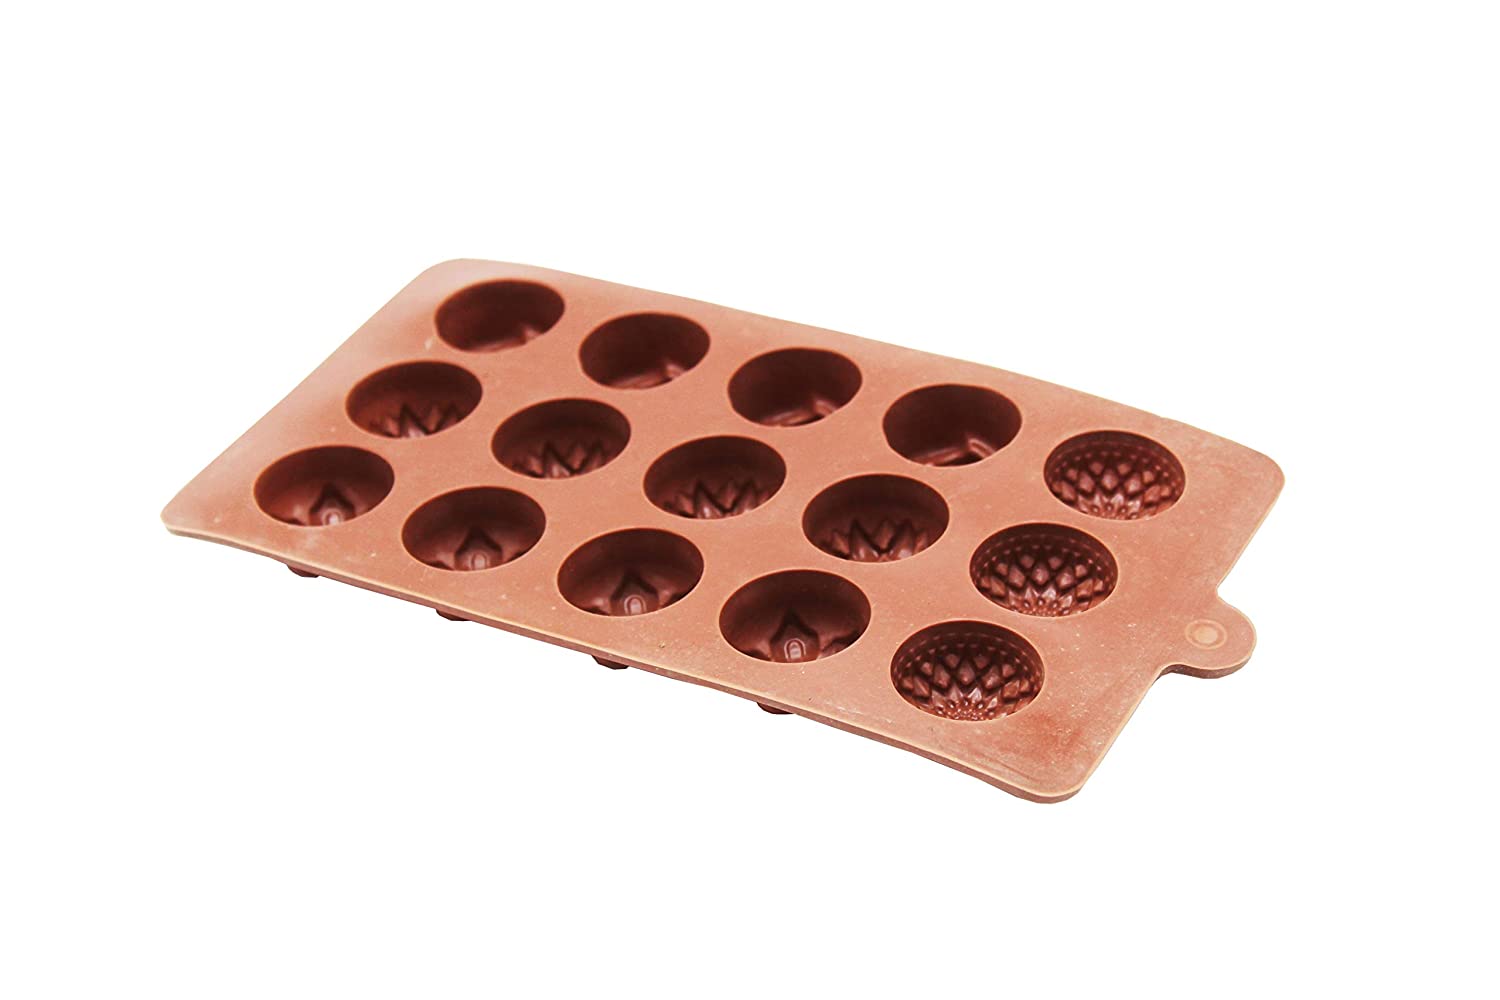 iLife Silicone Flexible Chocolate Mould with Multiple Shapes (Brown, 11x2x21.5 cm)